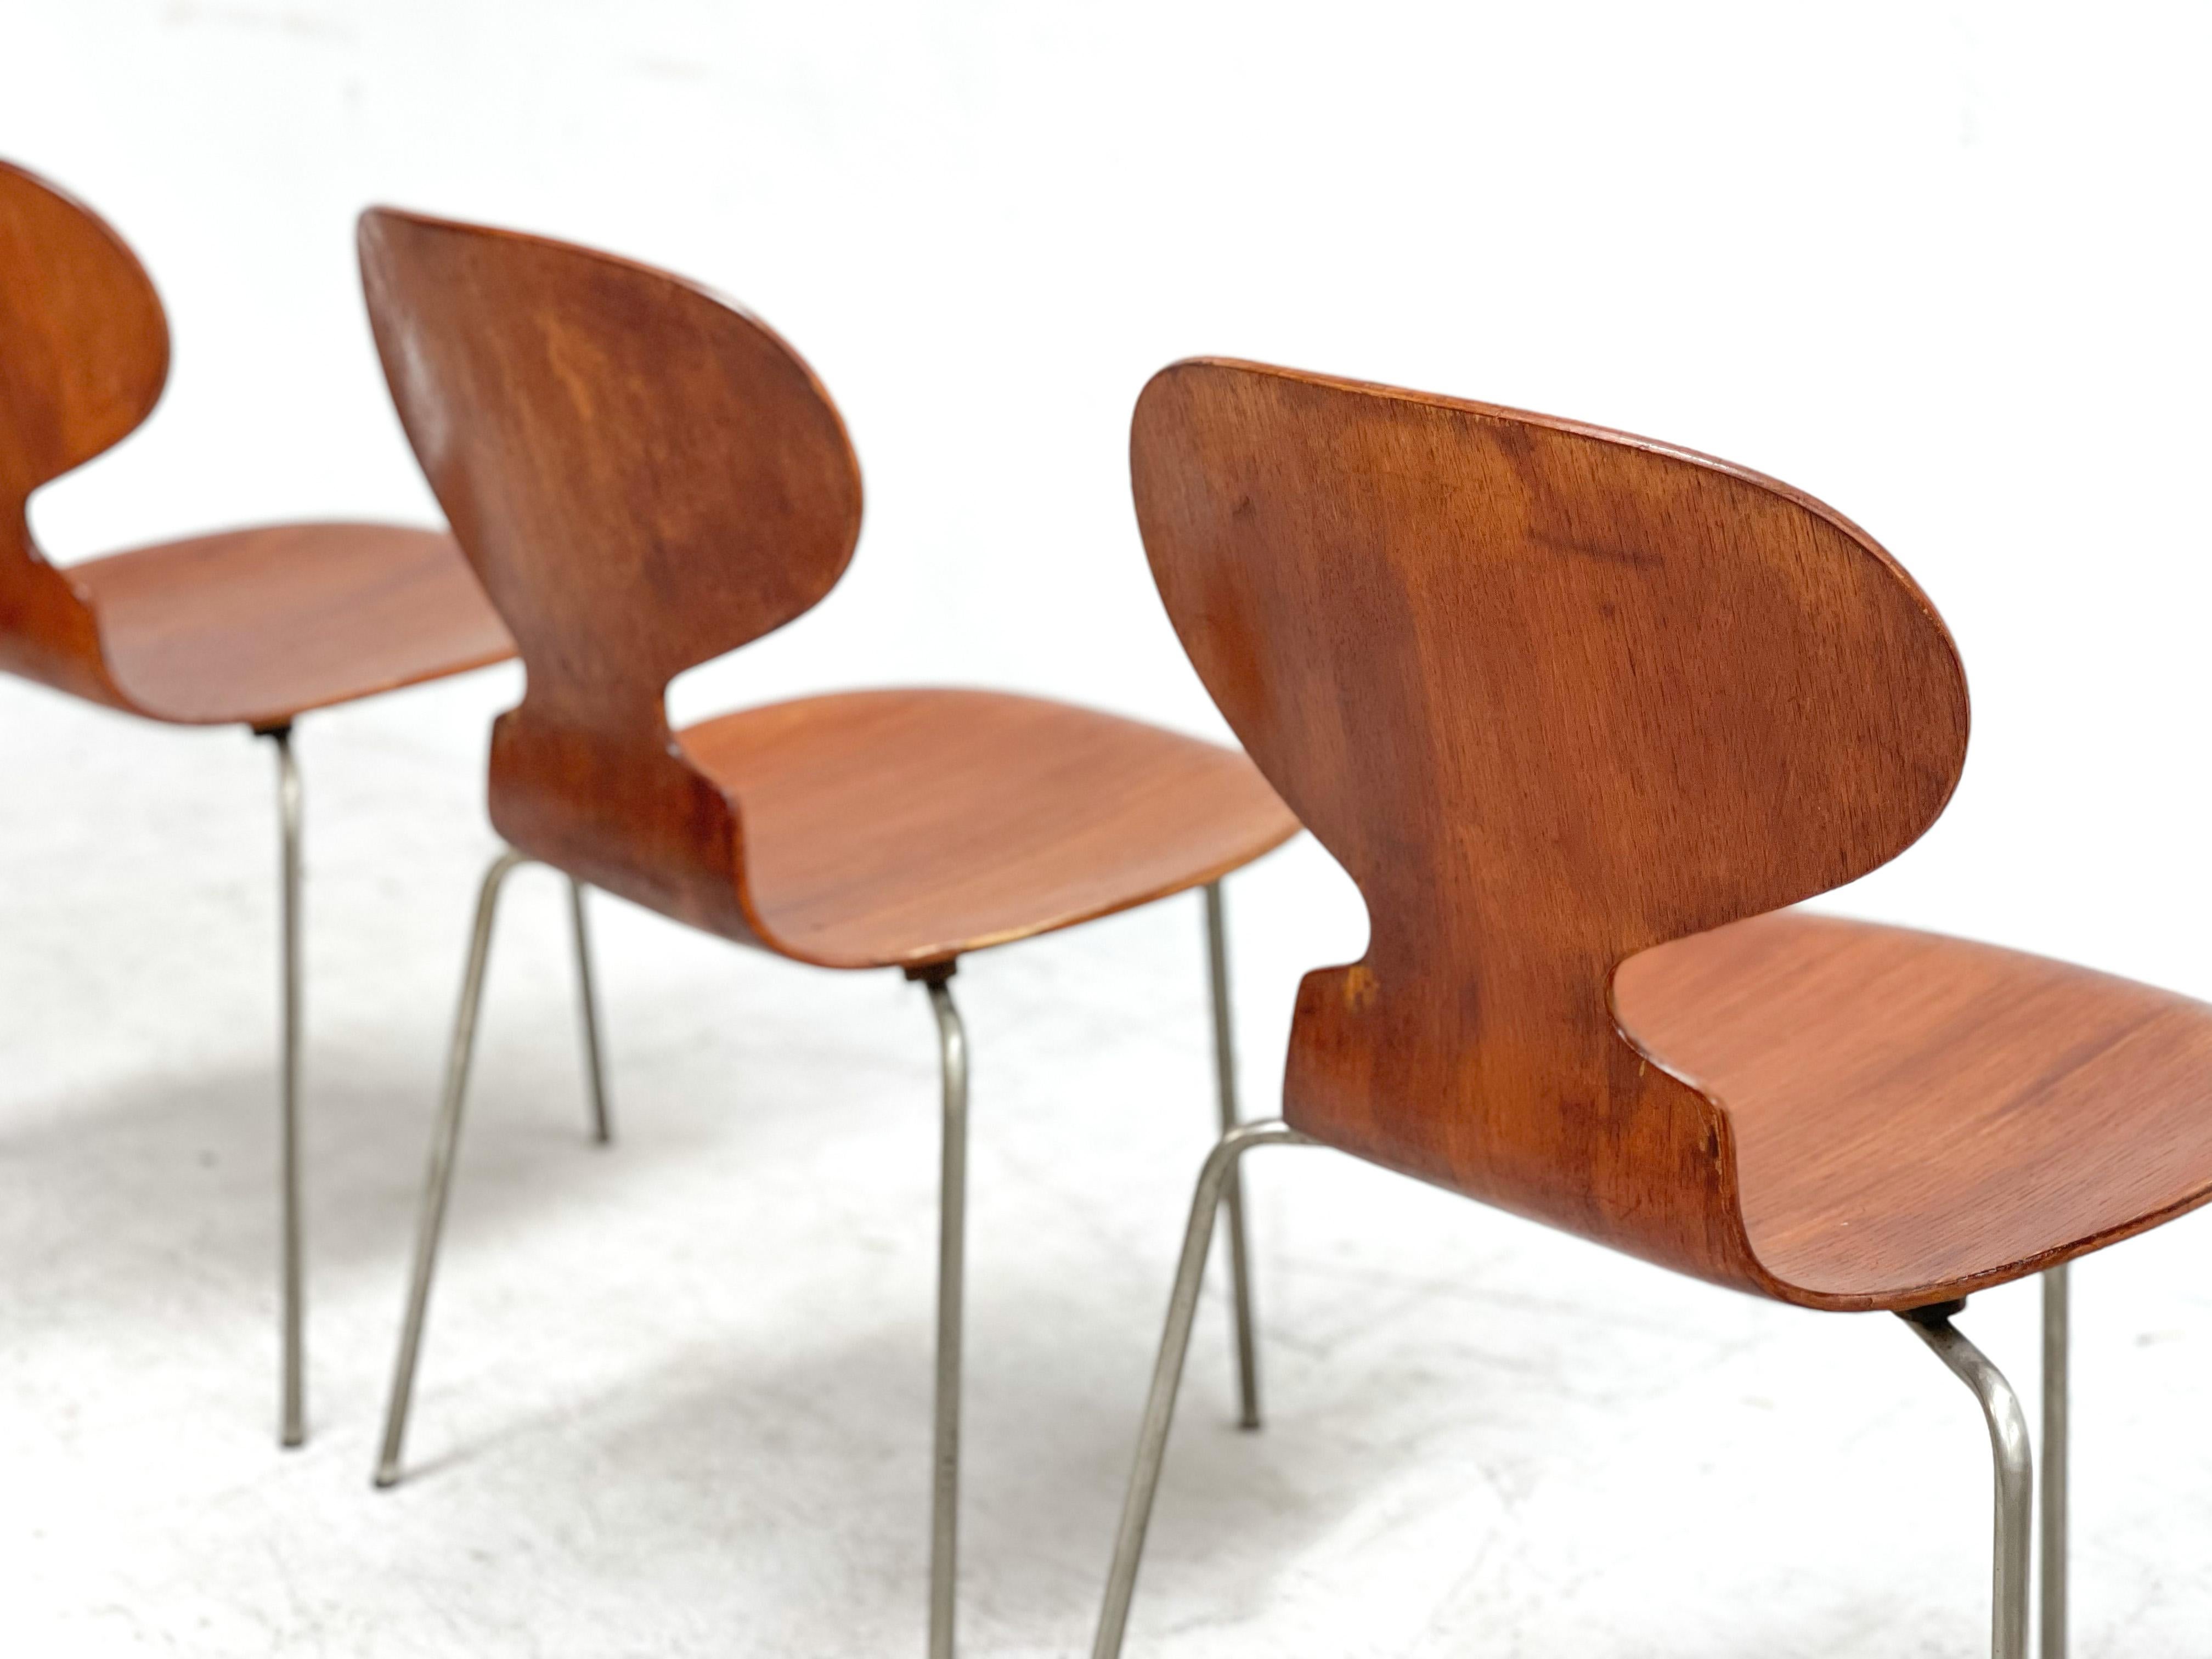 Mid-20th Century Early 1950's Arne Jacobsen Ant Chairs for Fritz Hansen